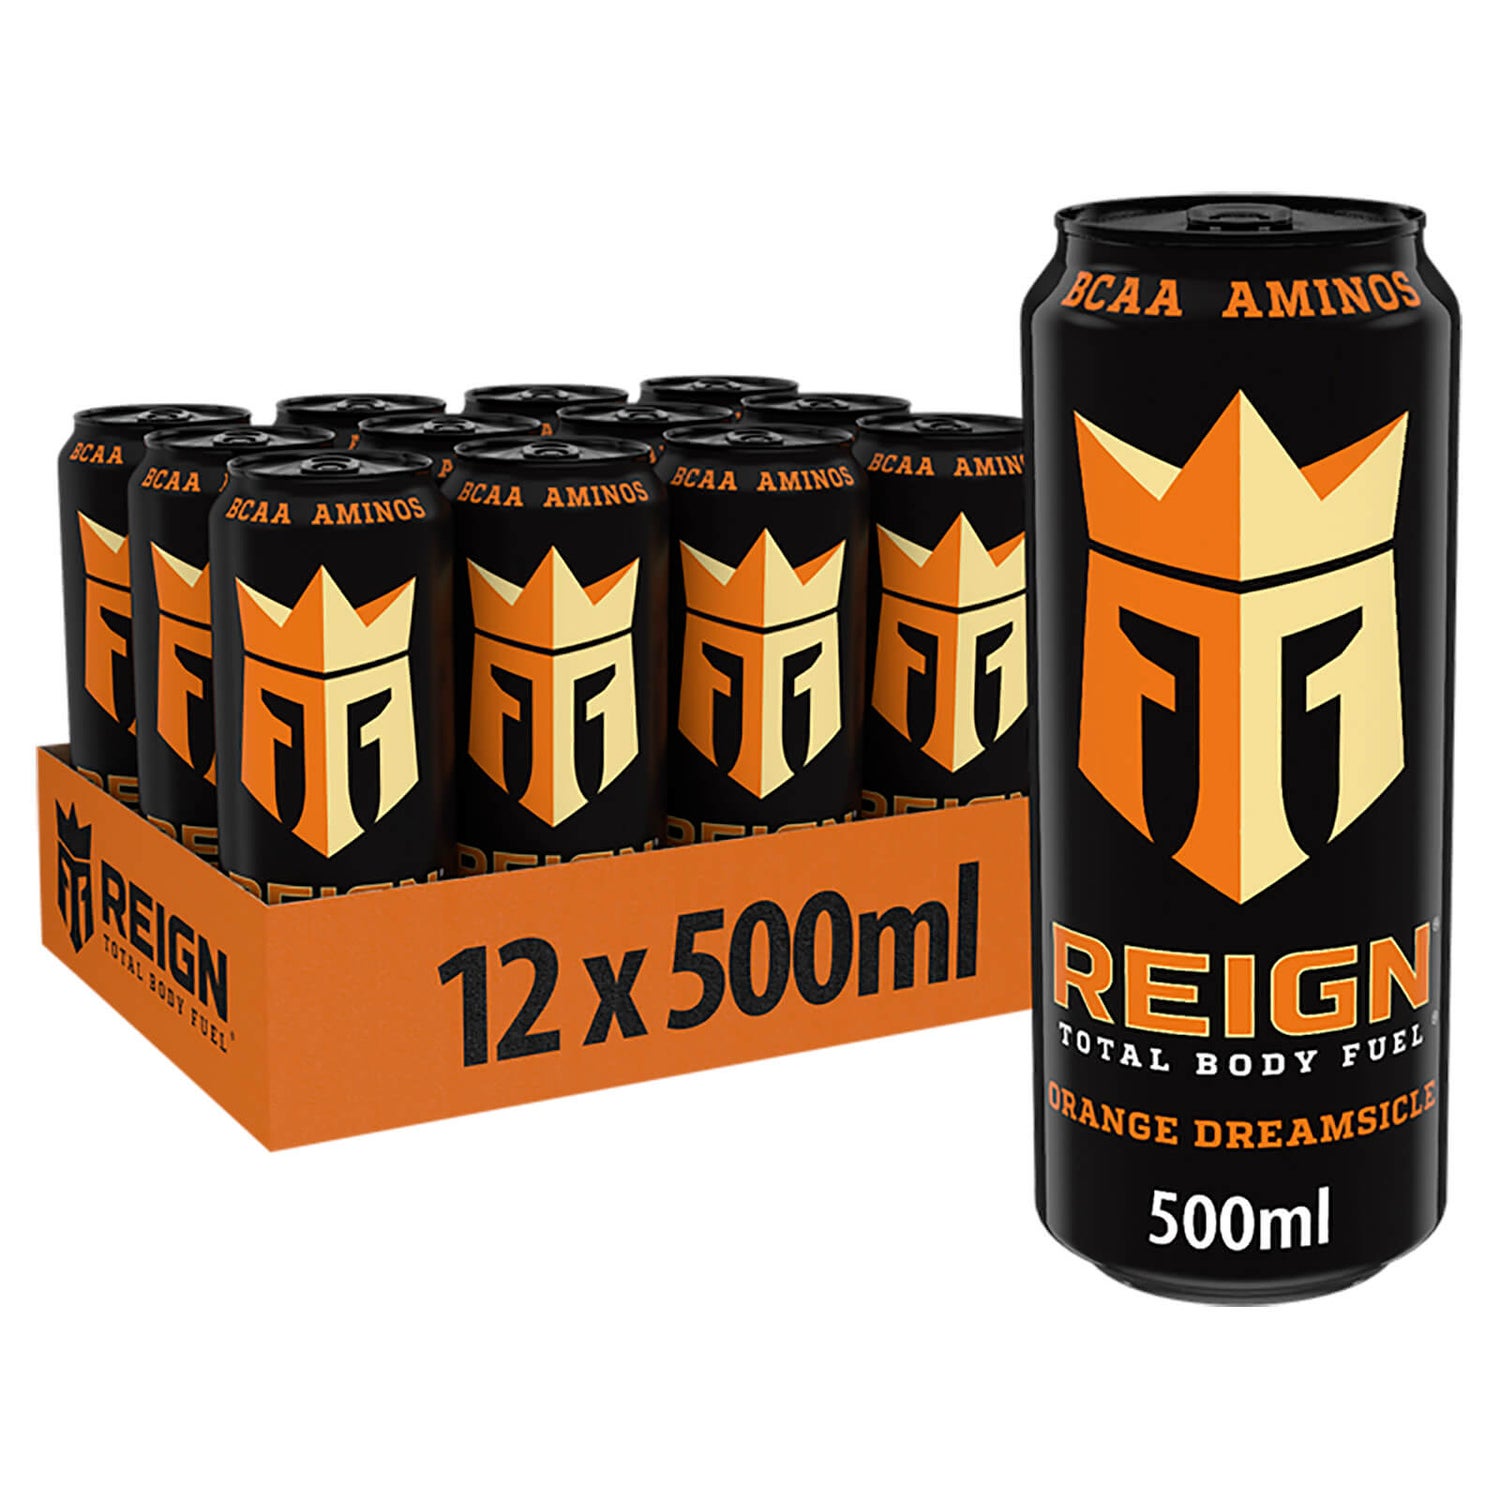 Reign Orange Dreamsicle 12 x 500ml Cans | Your Coca Cola UK